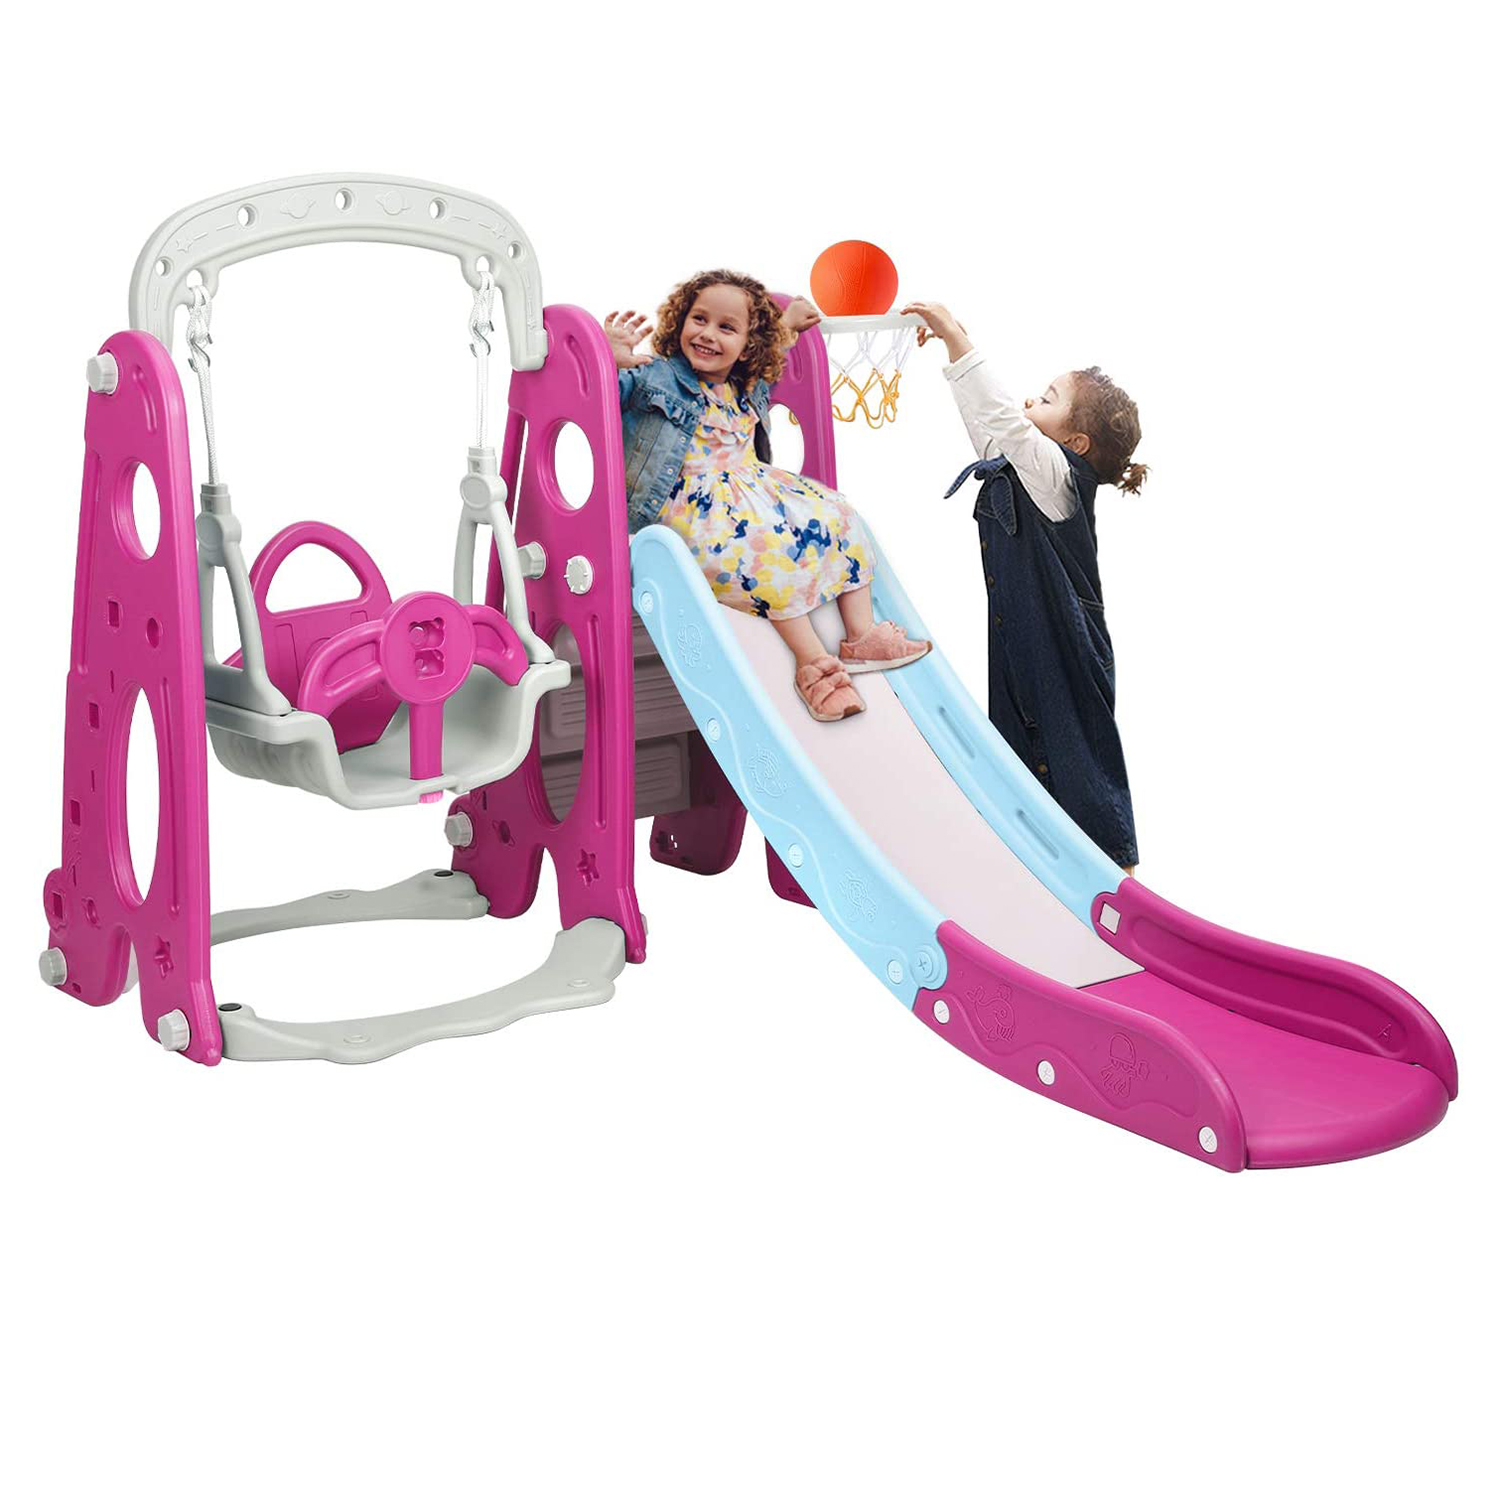 Best Outdoor Baby Toy: Bahom 3-in-1 Playset